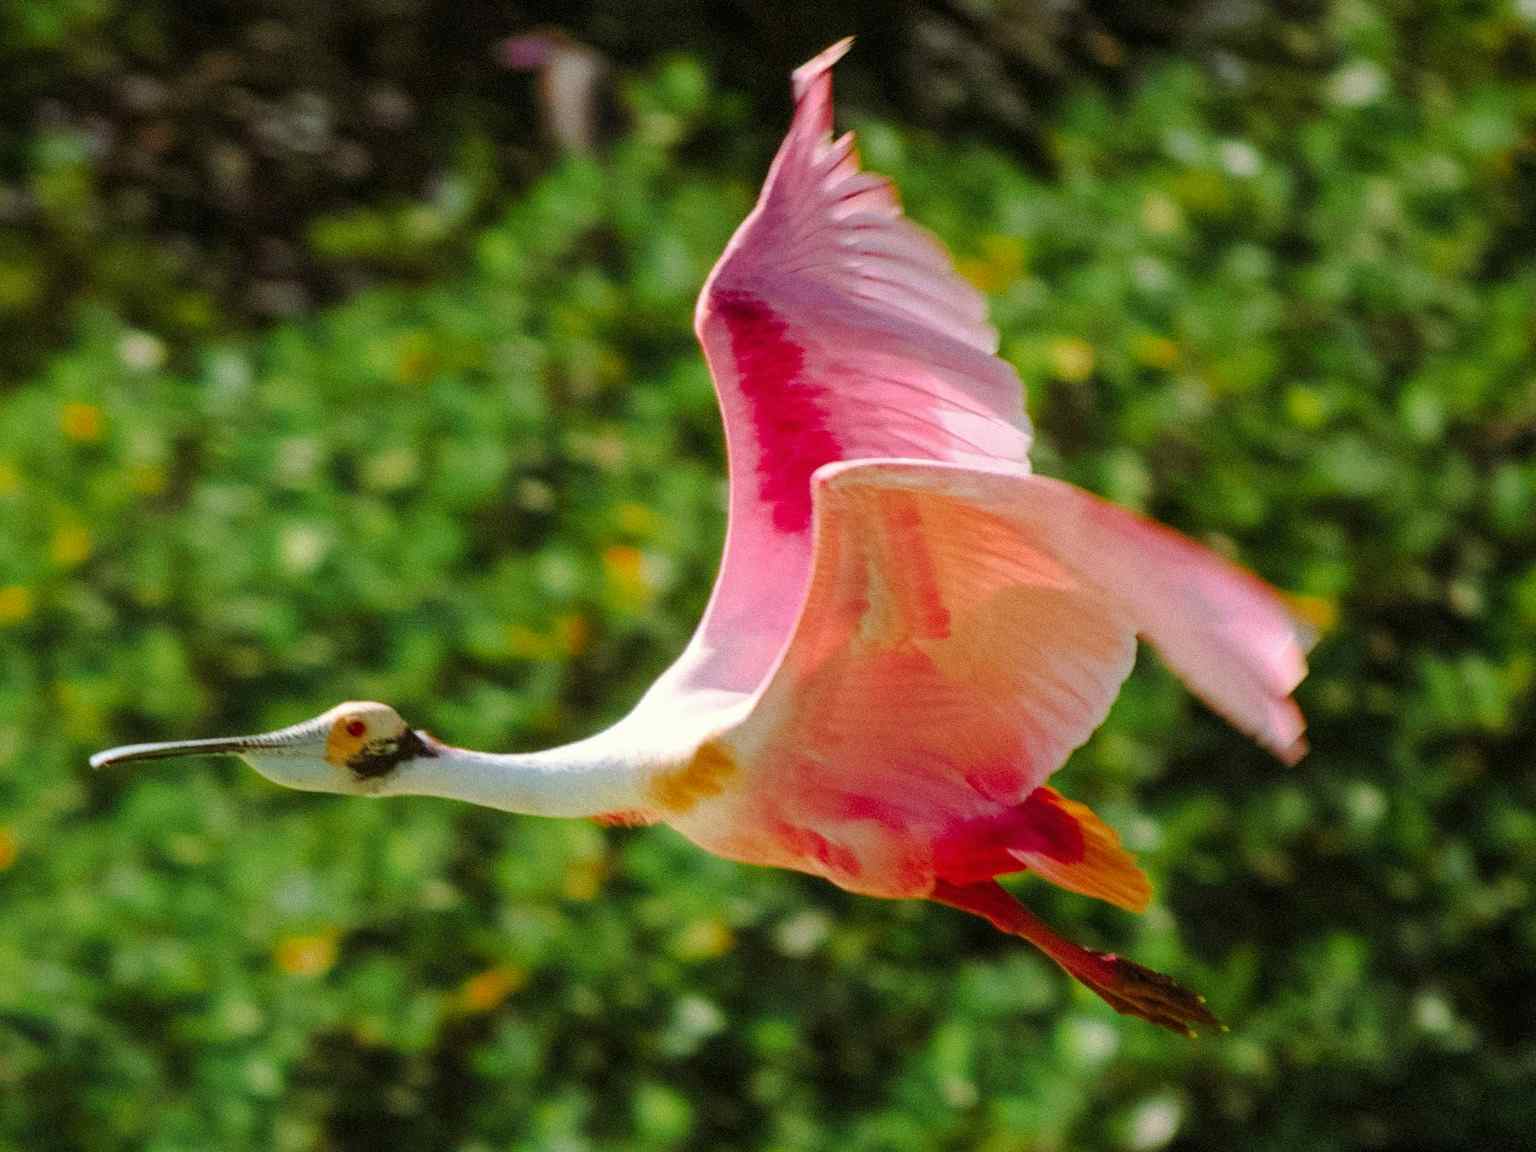 A flying Roseate Spoonbill in Mexico's Yucatan